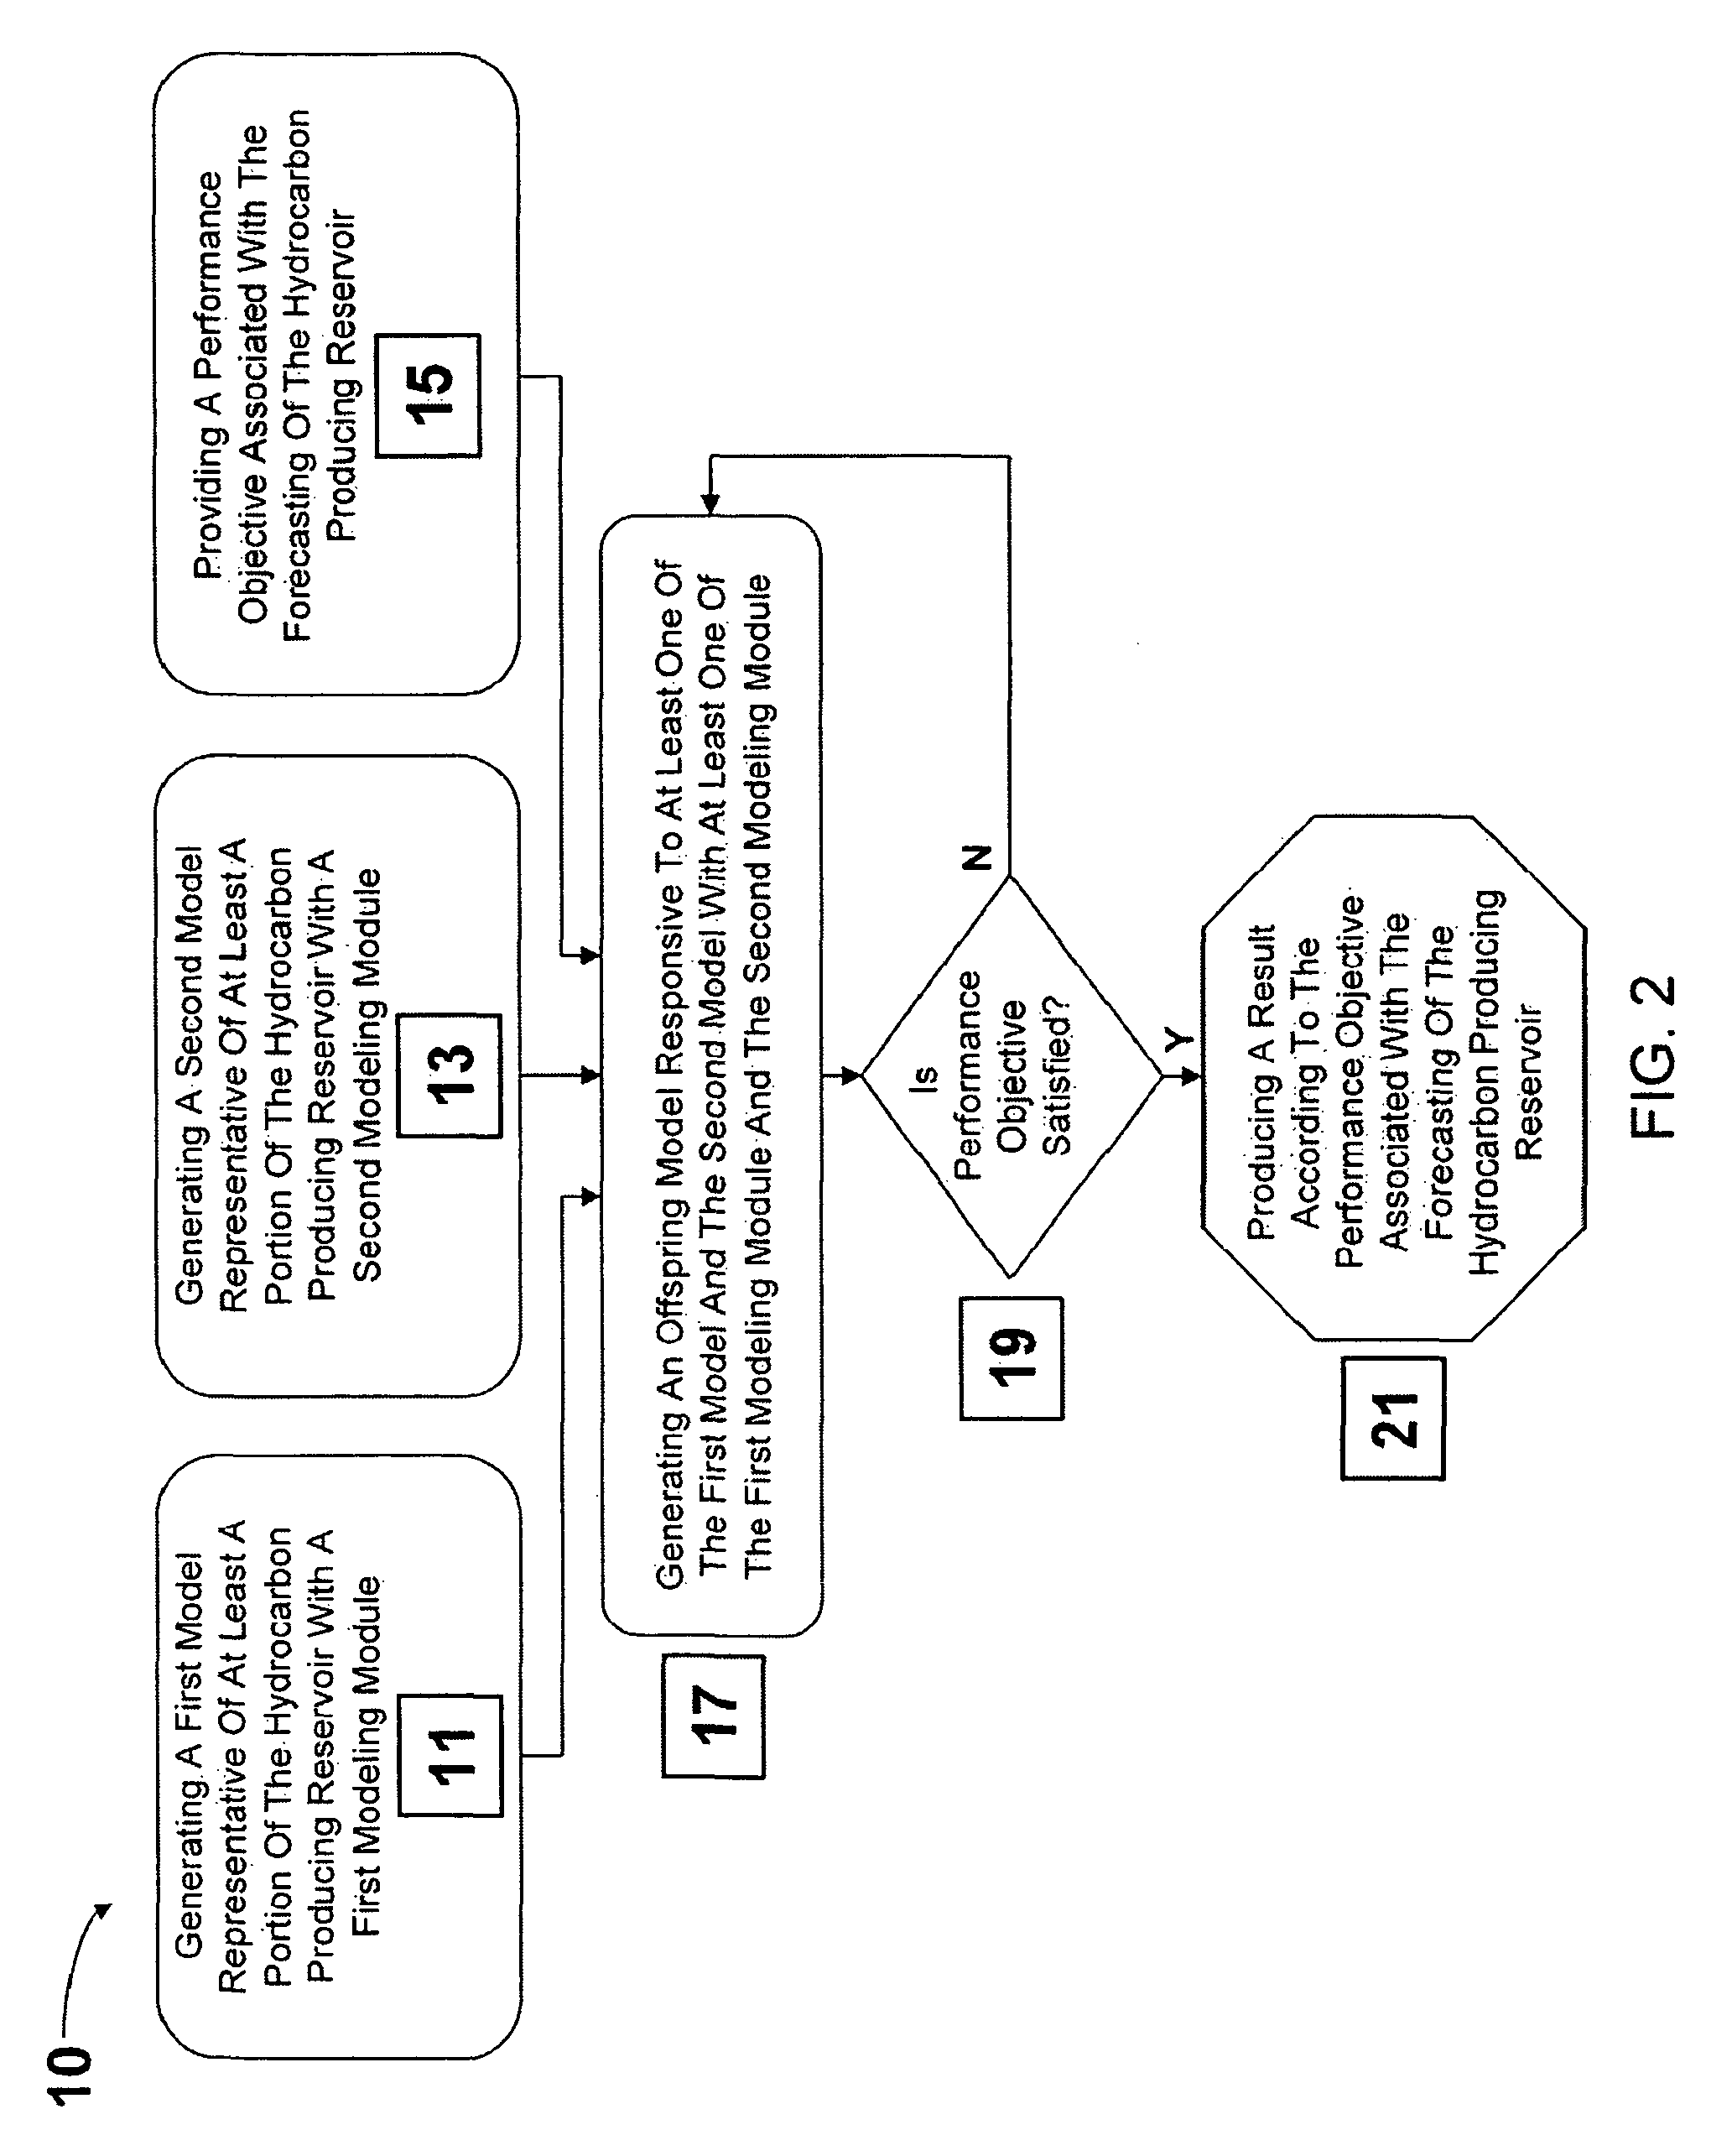 System and method for forecasting production from a hydrocarbon reservoir